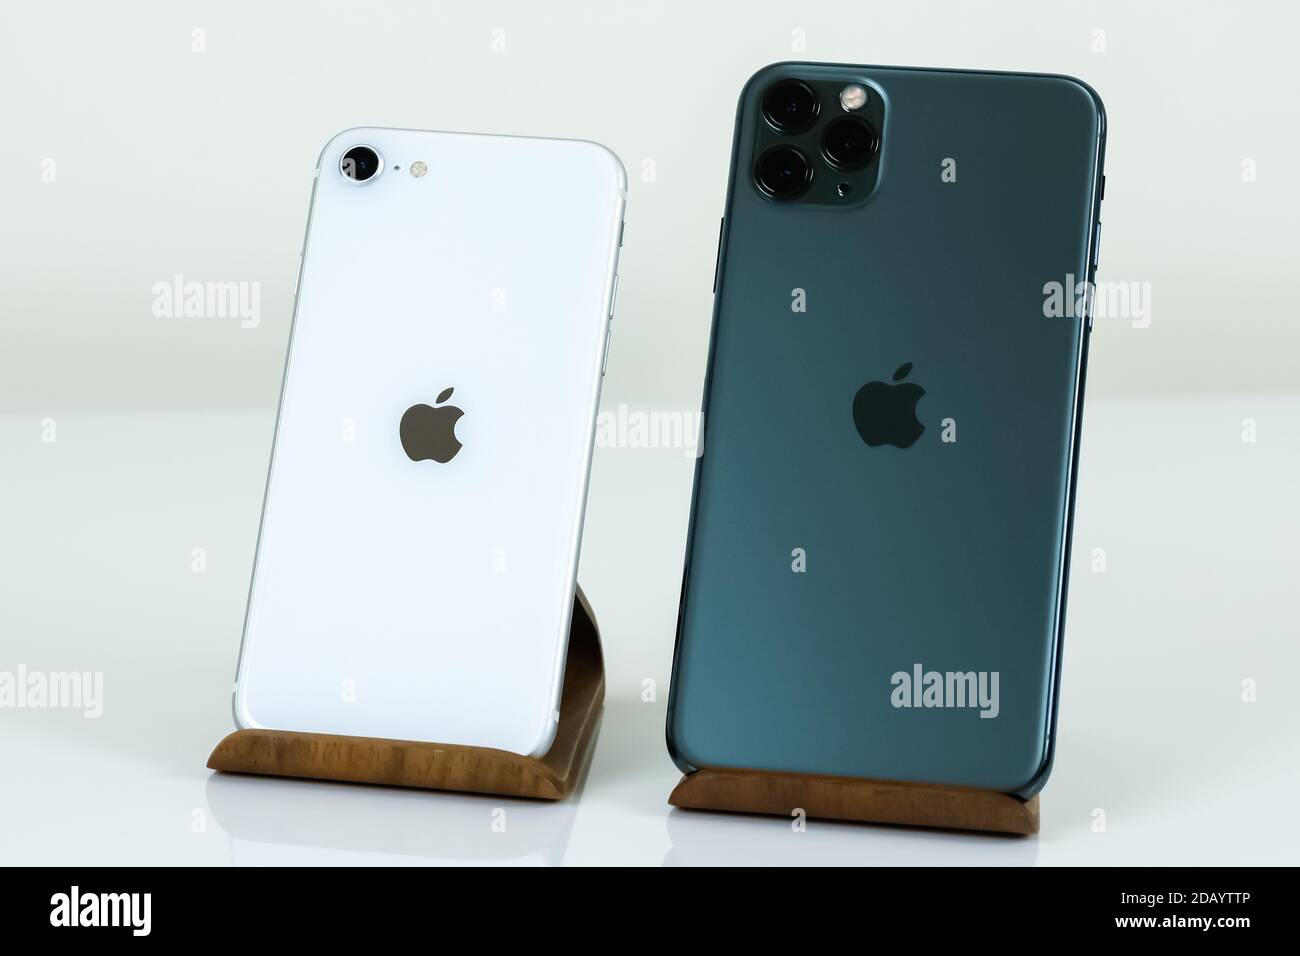 iPhone SE 2 (2nd generation) and iPhone 11 Pro Max Stock Photo - Alamy